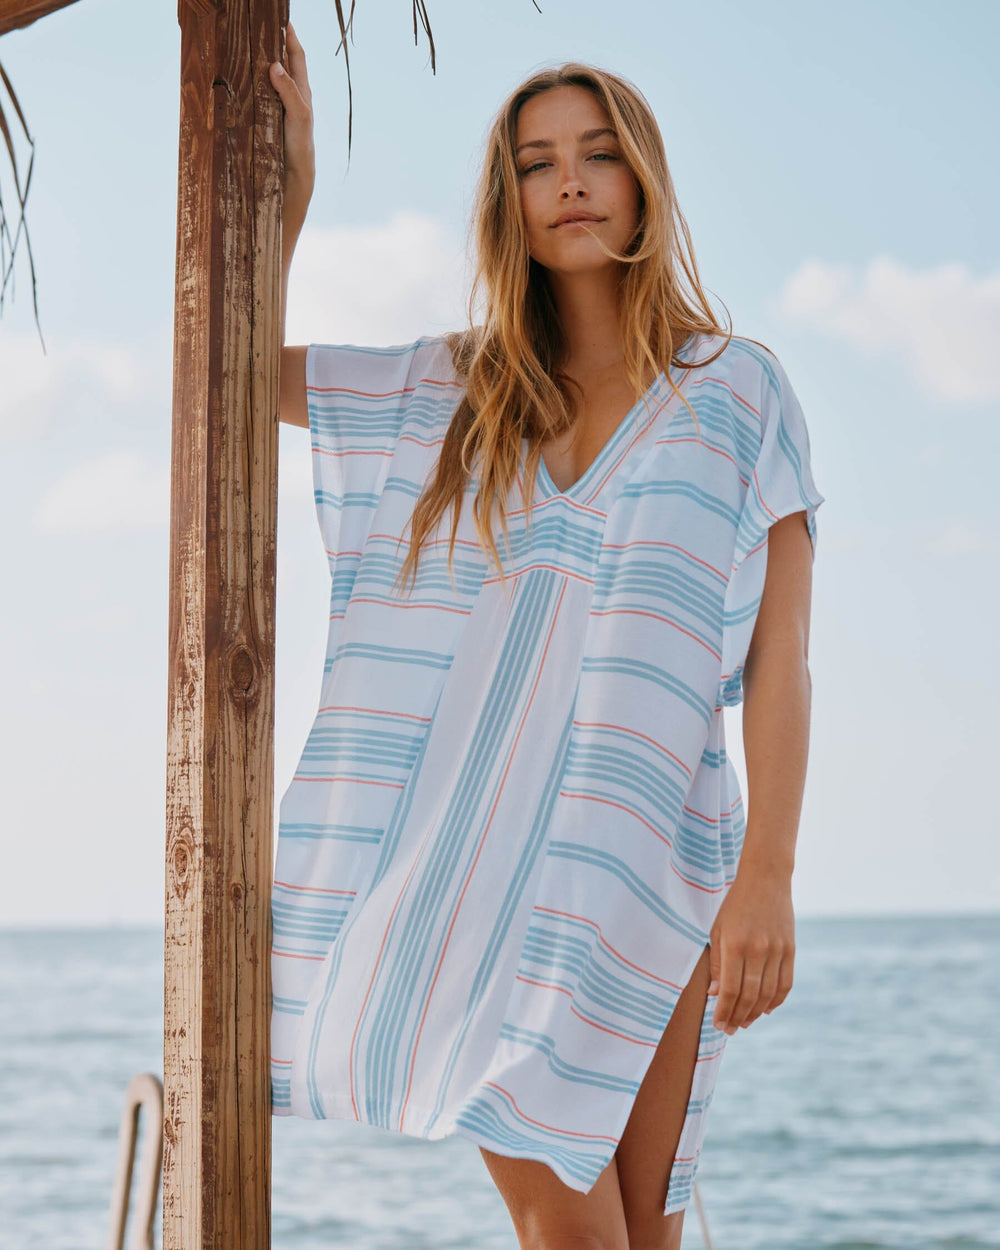 The lifestyle view of the Southern Tide Kamilia Beach Bliss Stripe Caftan by Southern Tide - Sky Blue